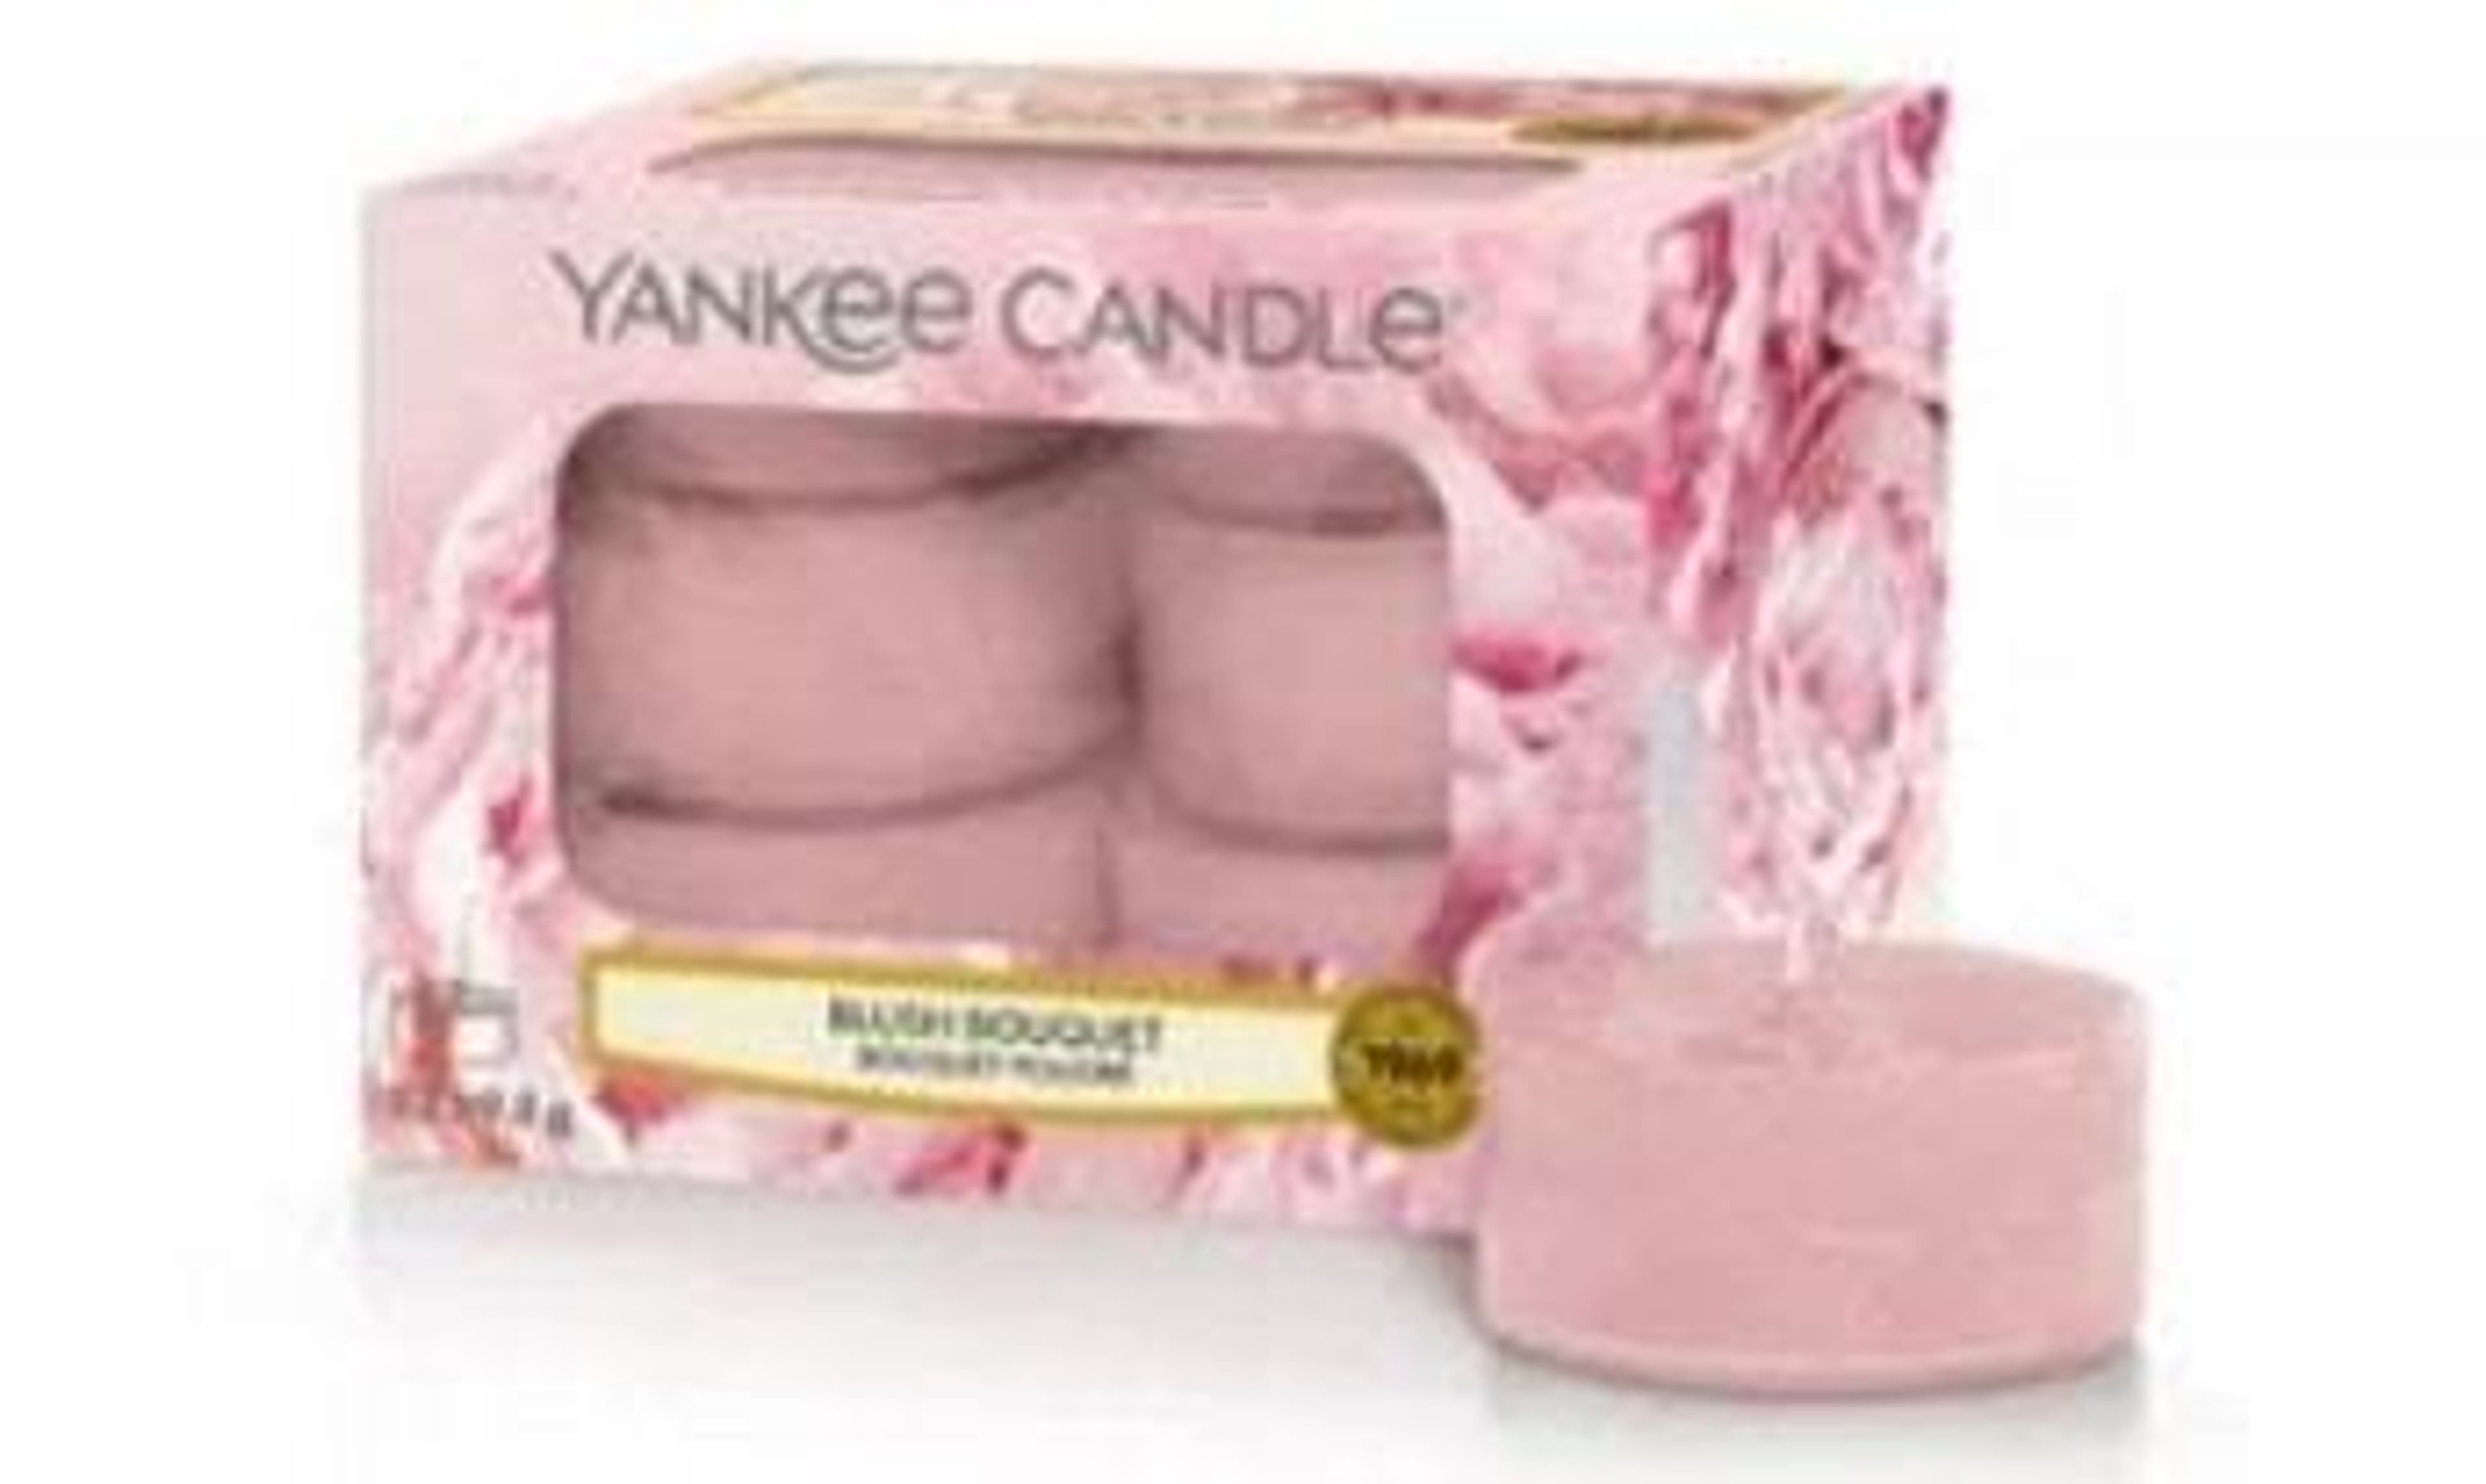  Candles from the Yankee Candle Outlet 